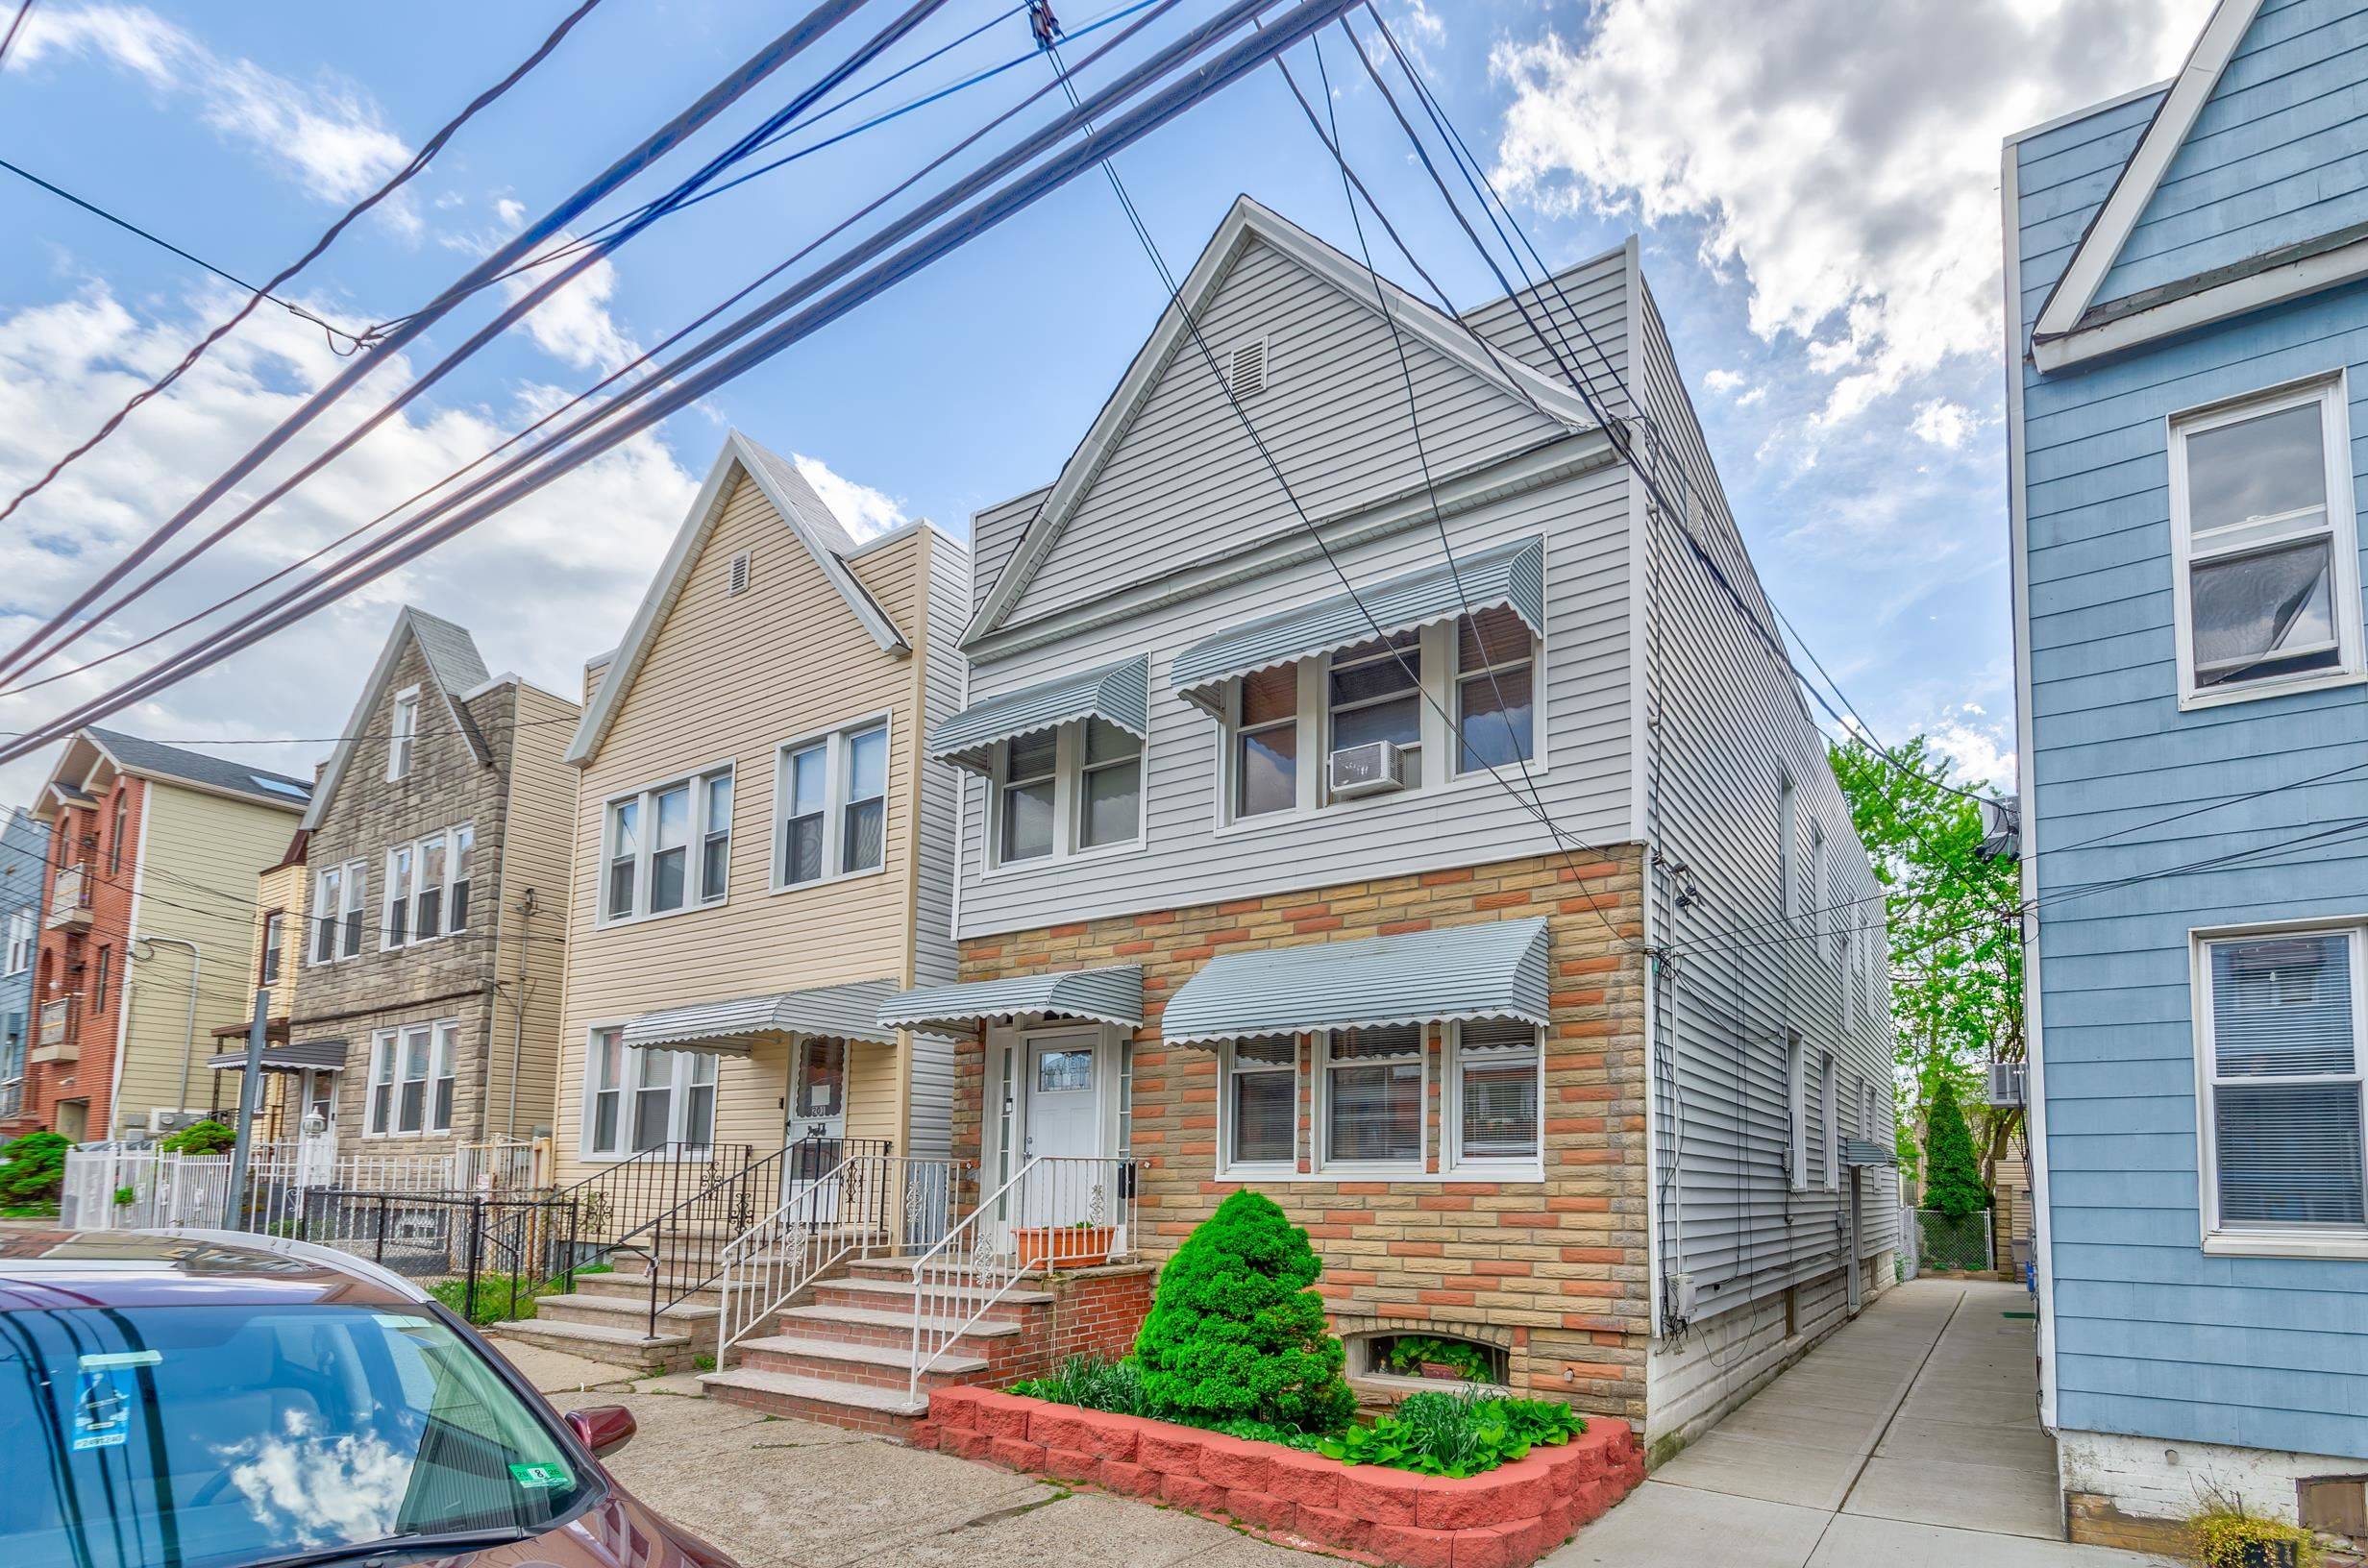 203 GATES AVE Multi-Family New Jersey